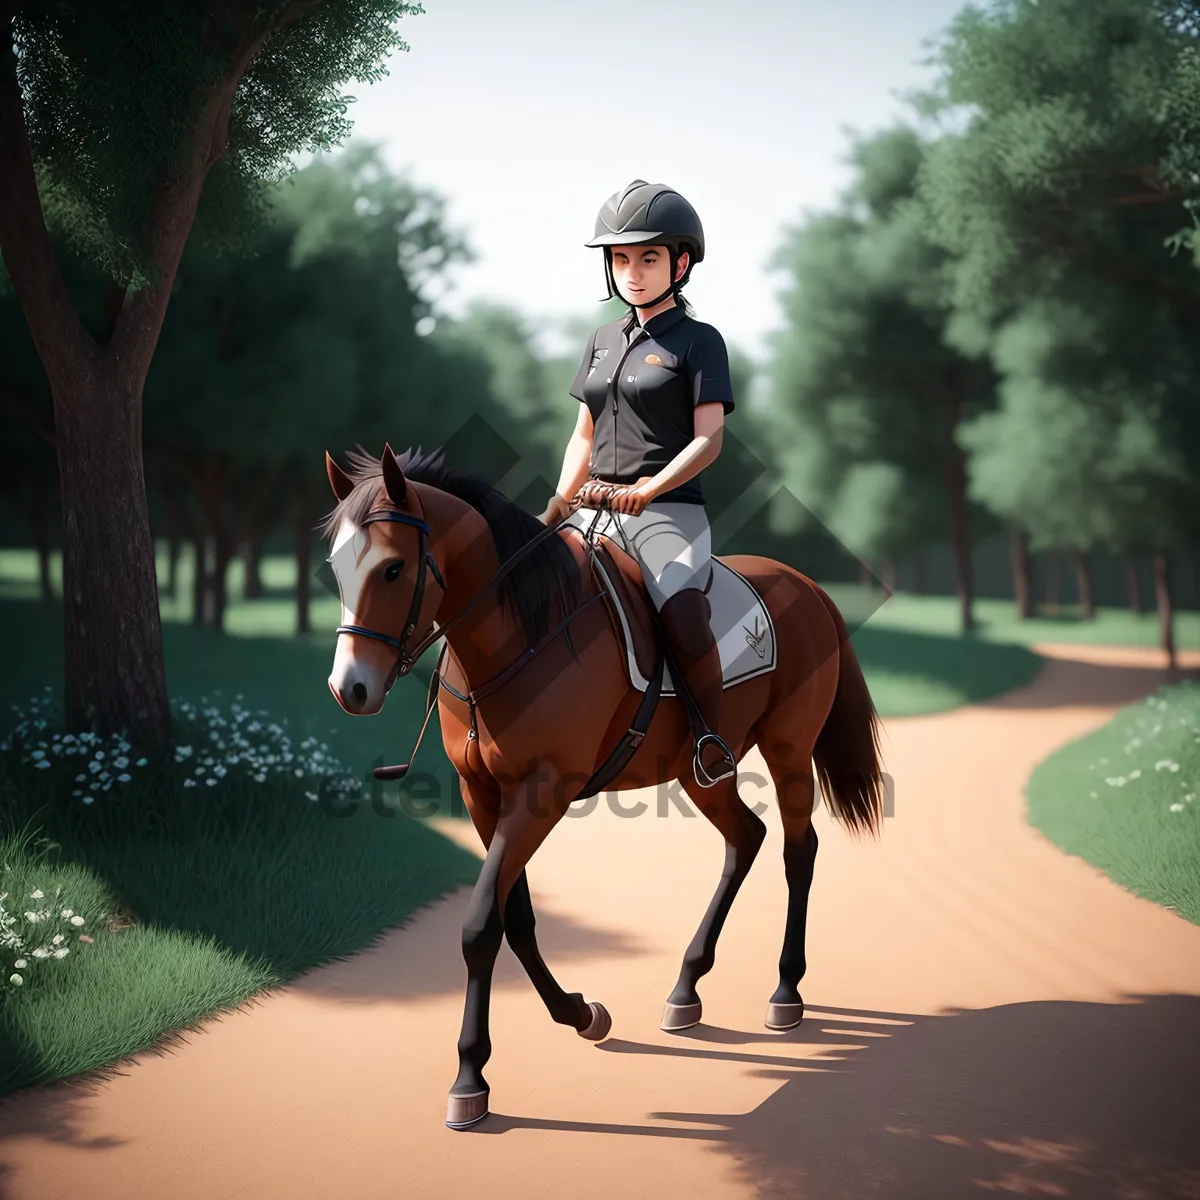 Picture of Speedy Equestrian Horseback Riding with Polo Mallet